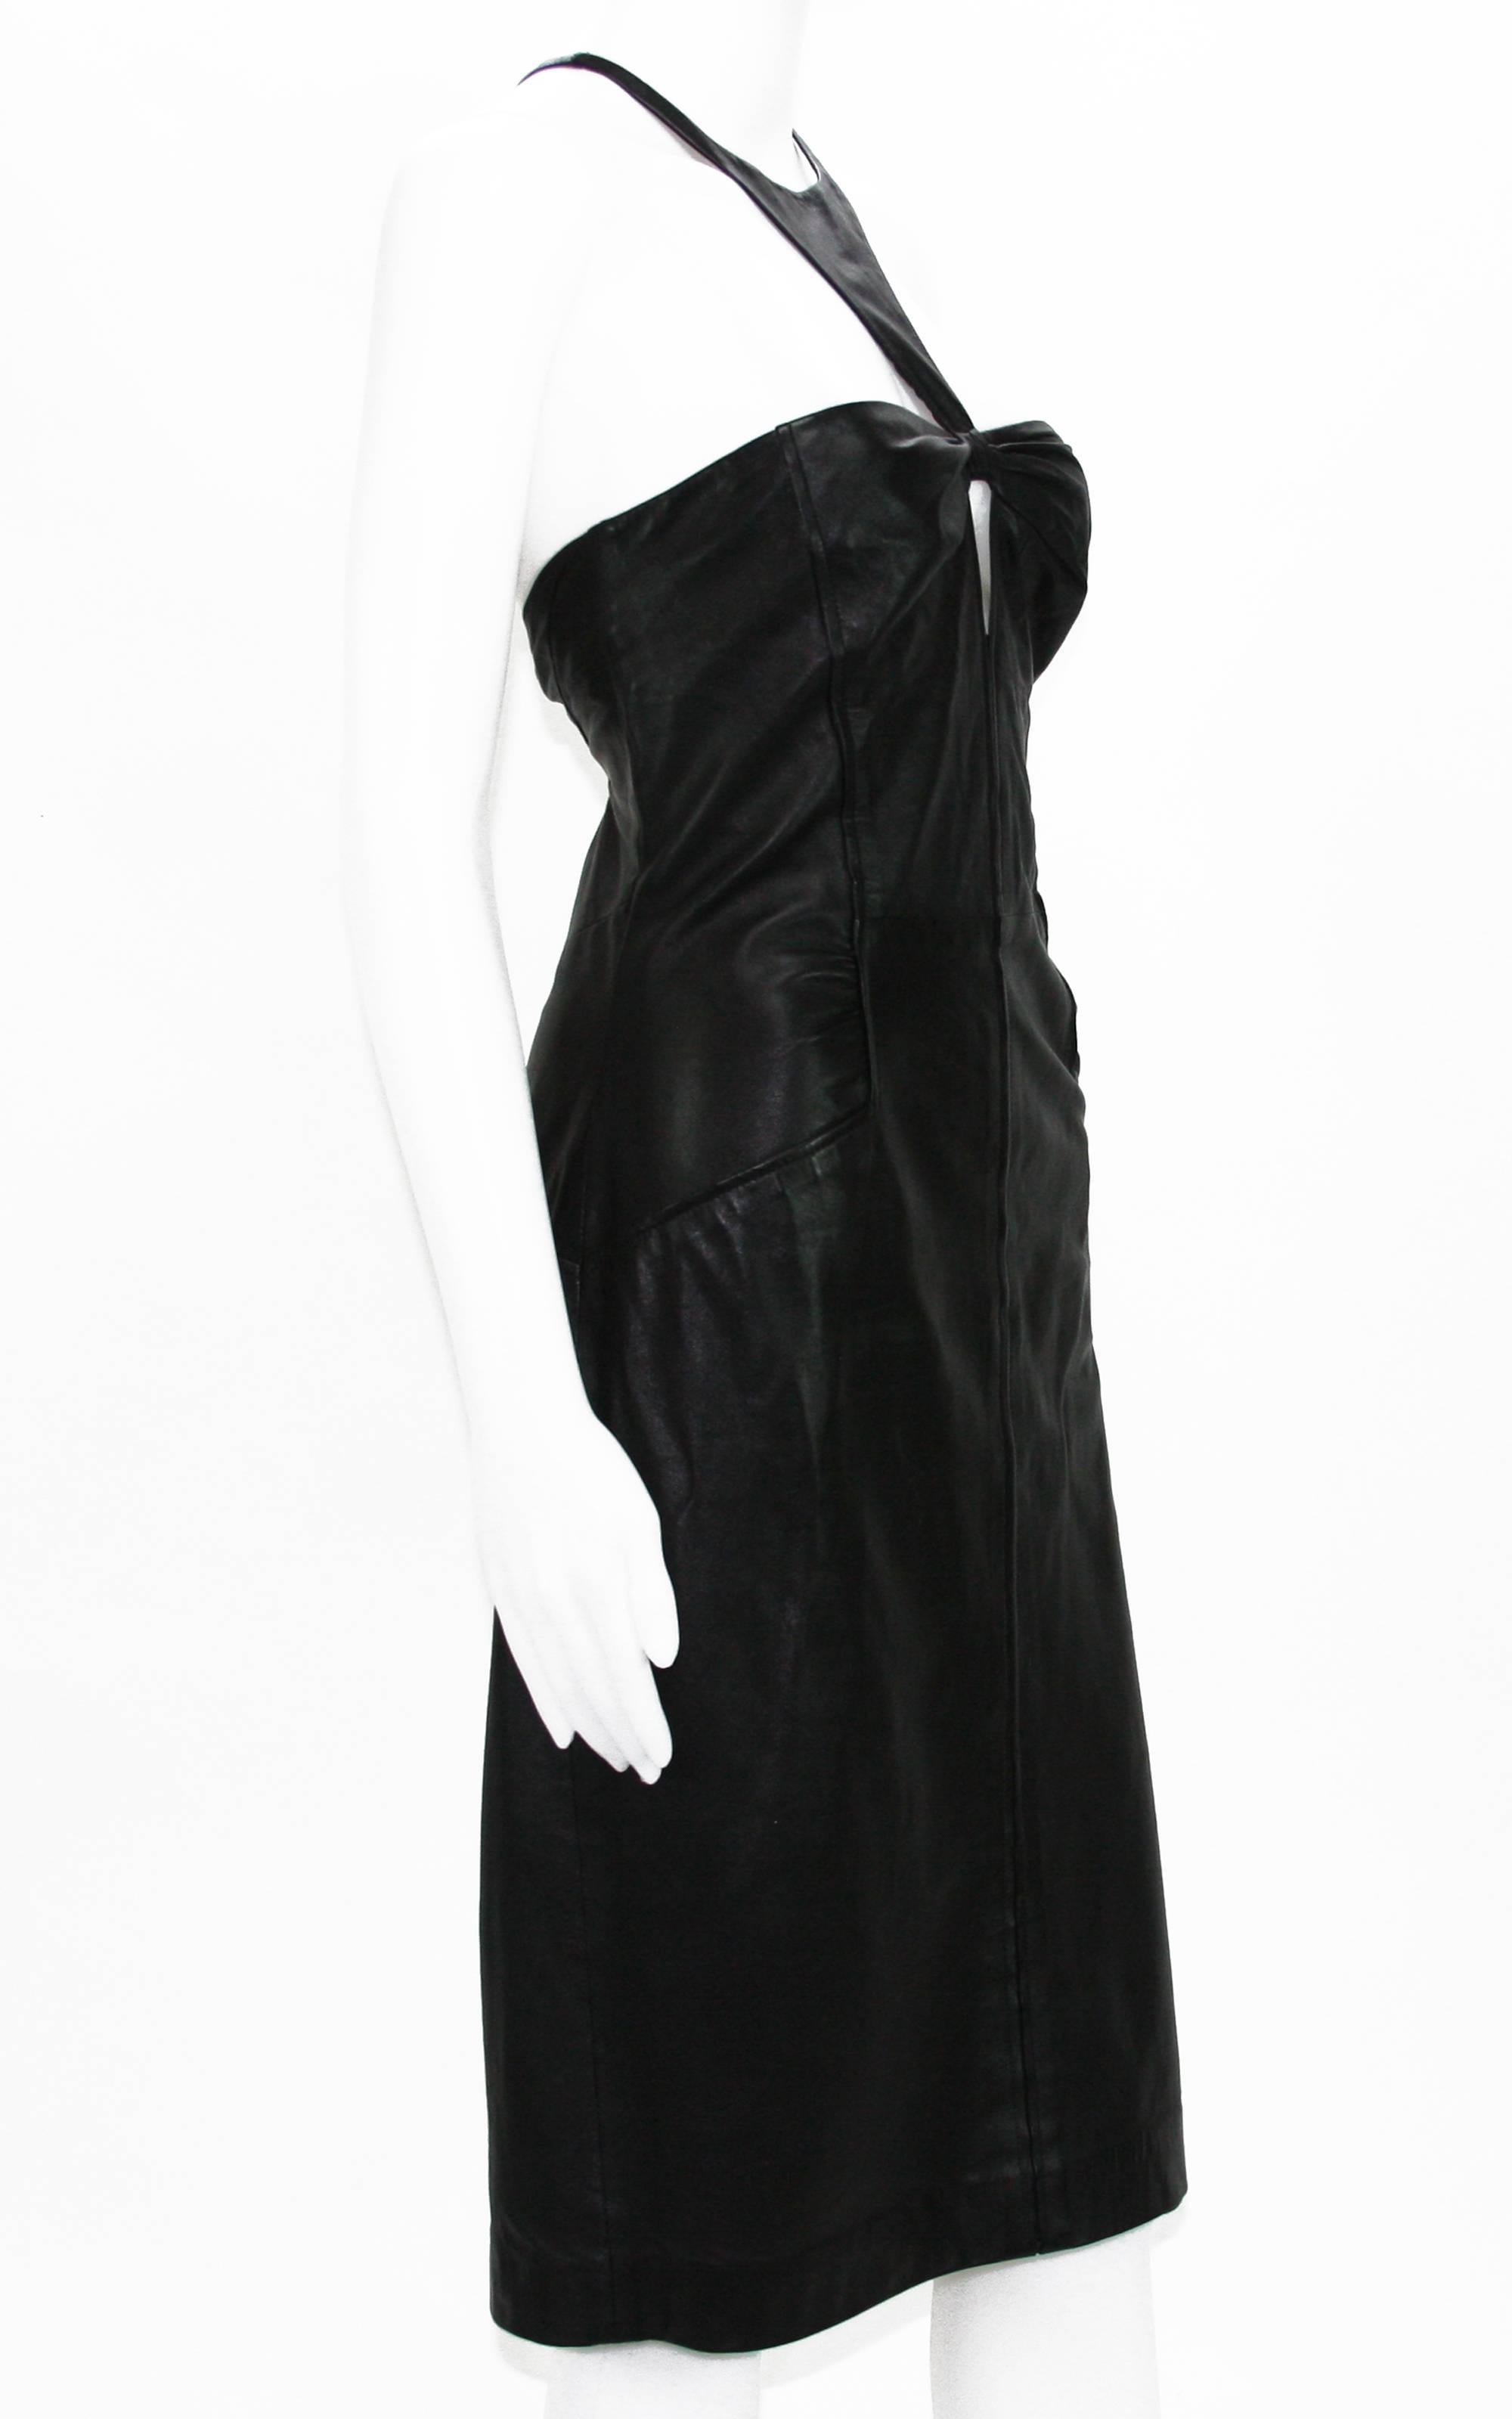 Tom Ford for Gucci Black Leather Cocktail Dress
2004 Collection
Italian size 44 - US 8
Color - Black.
100% Super Soft Leather.
Fully Lined.
Side Zip Closure.
Measurements Flat: Length - 40 inches, Waist - 15